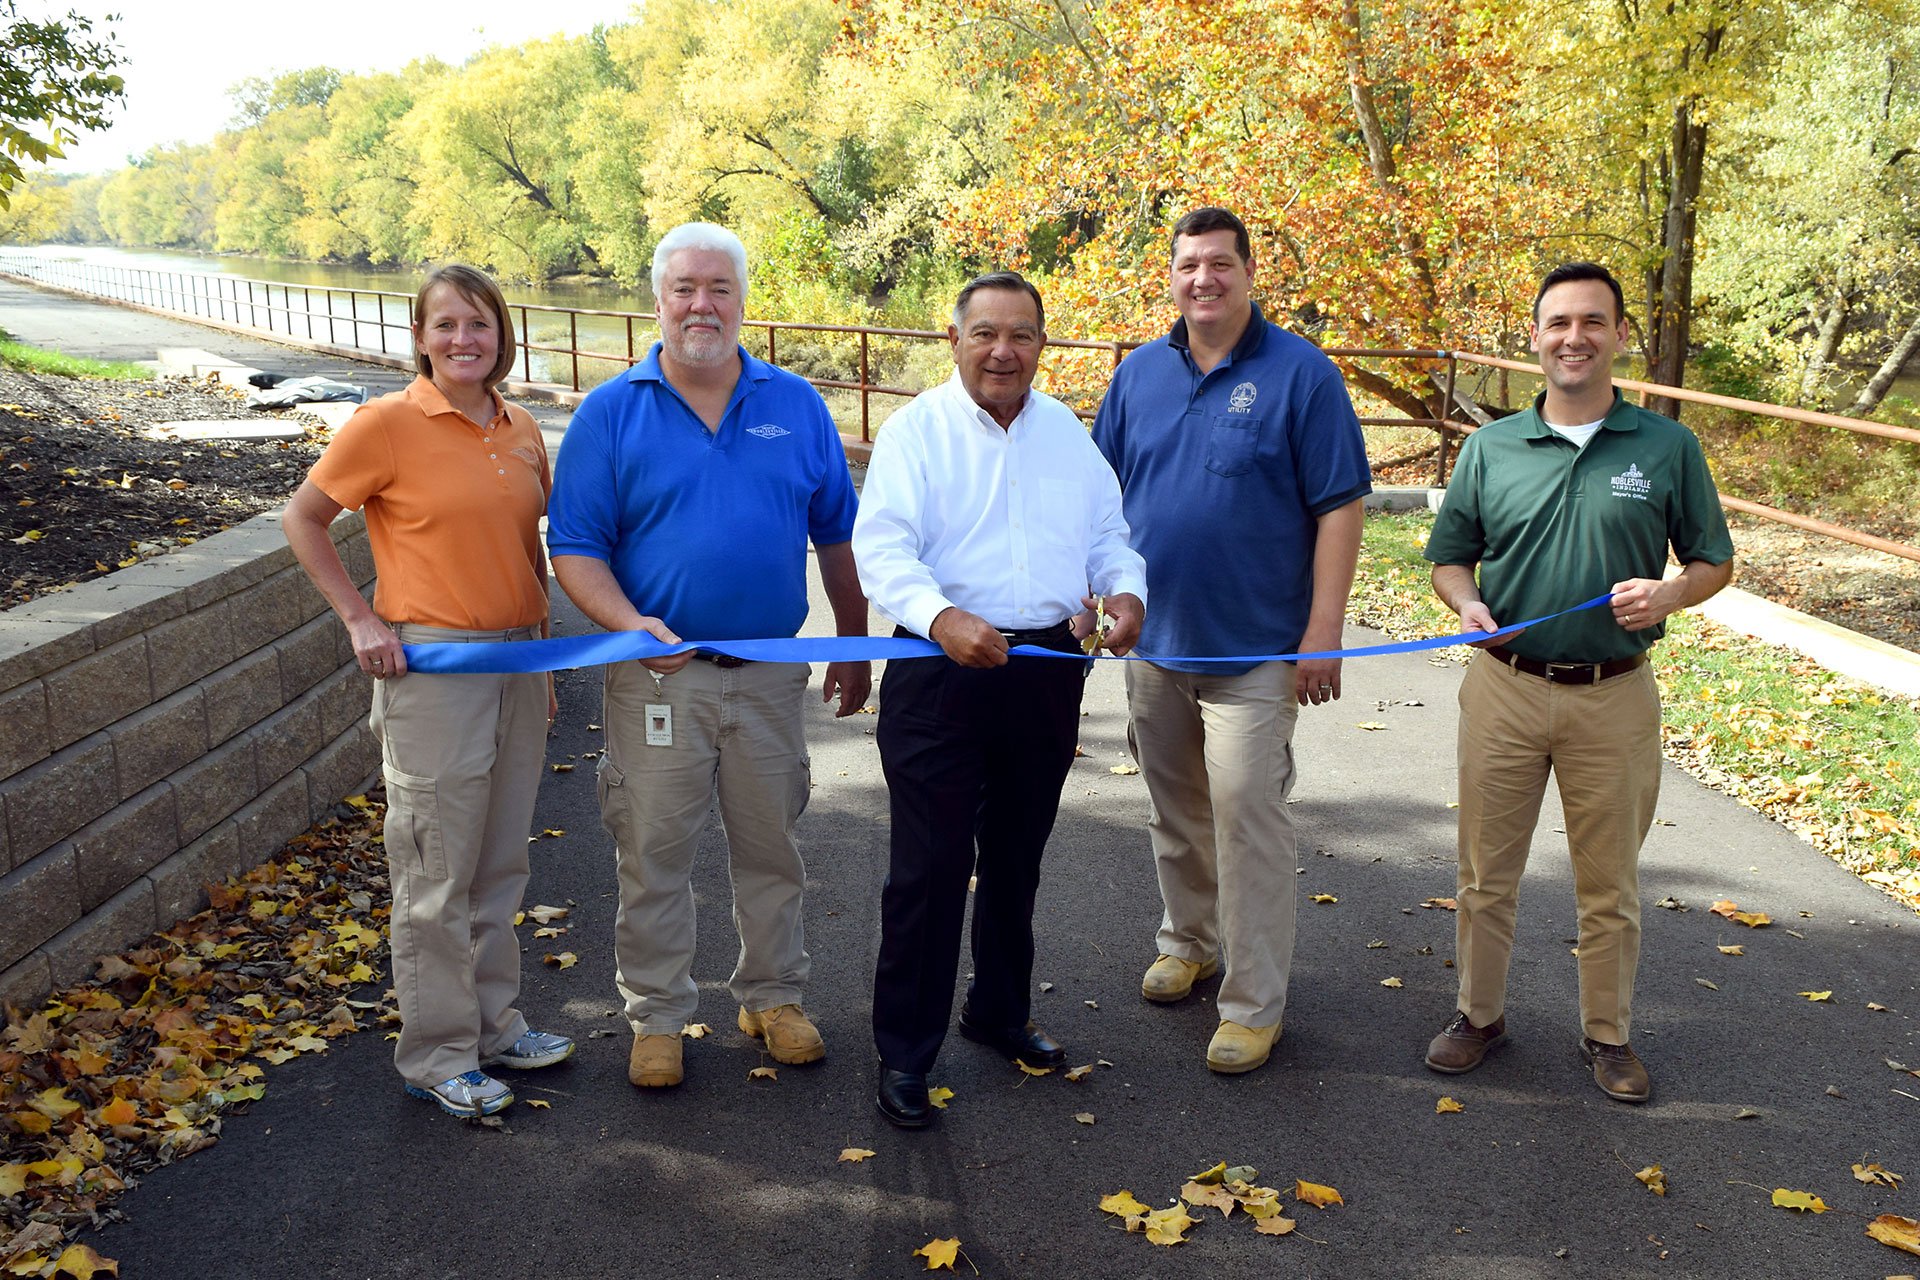 Noblesville Opens Southern Section of Riverwalk Trail Extension